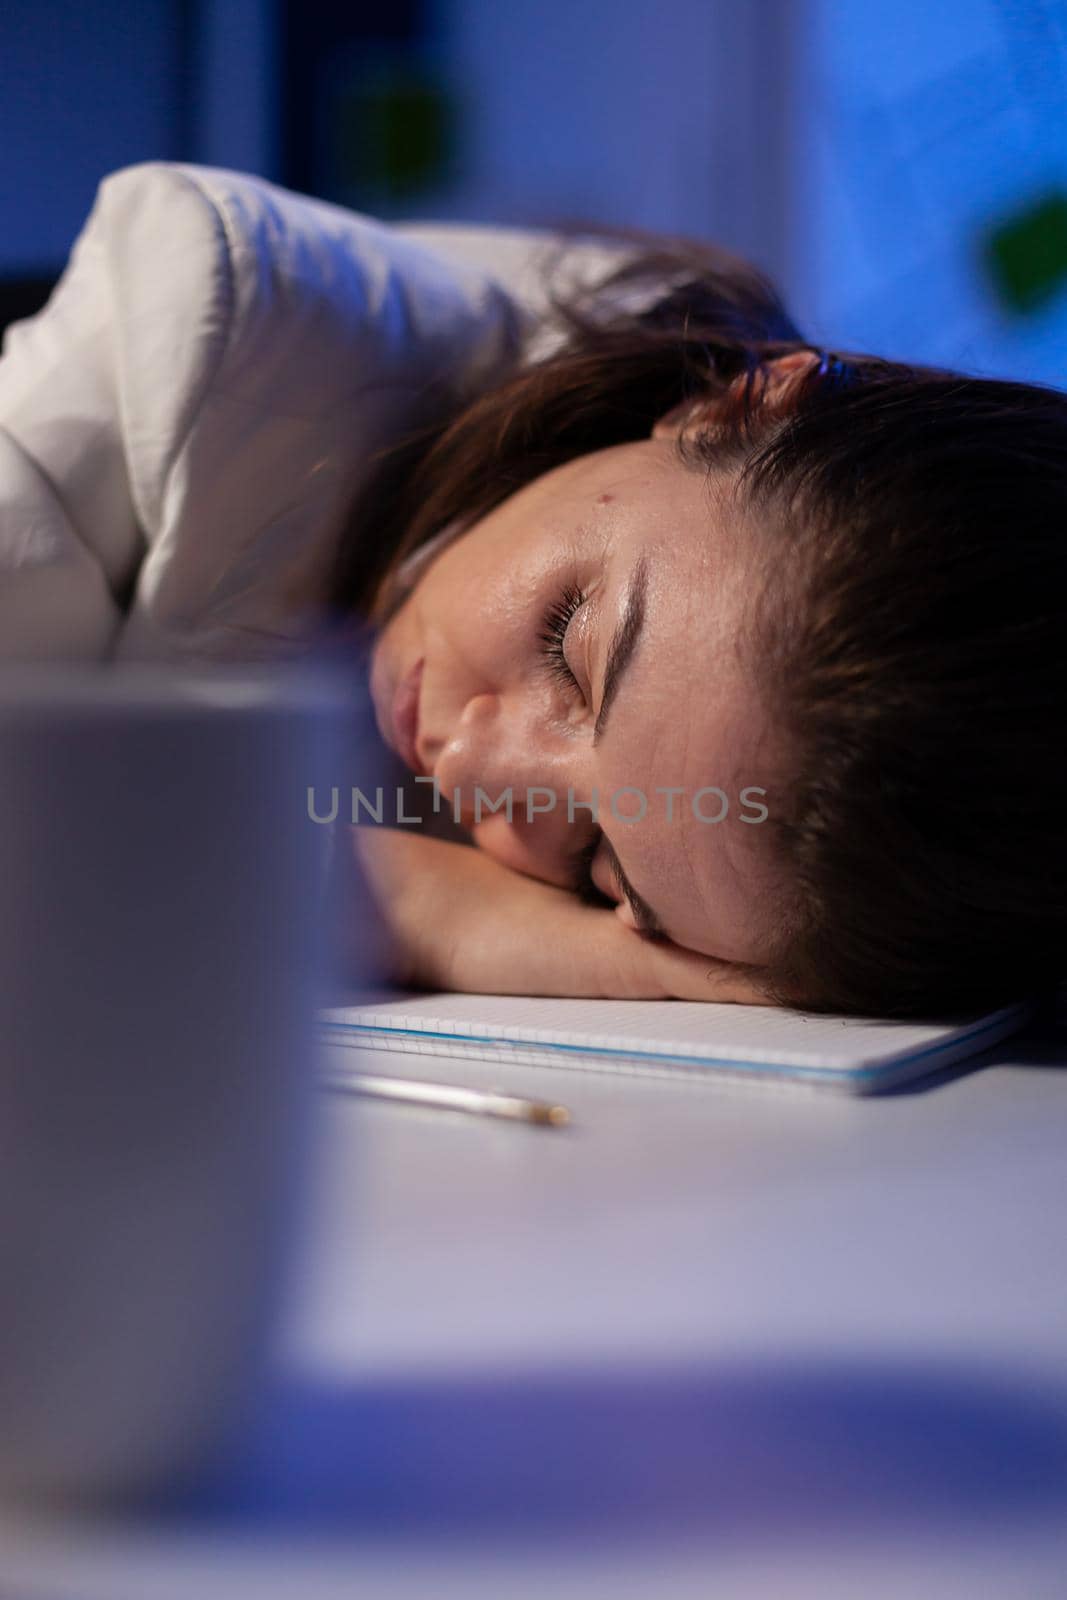 Business woman falling asleep while working at economic statistics late at night in office company. Executive boss working on financial project using modern technology network wireless